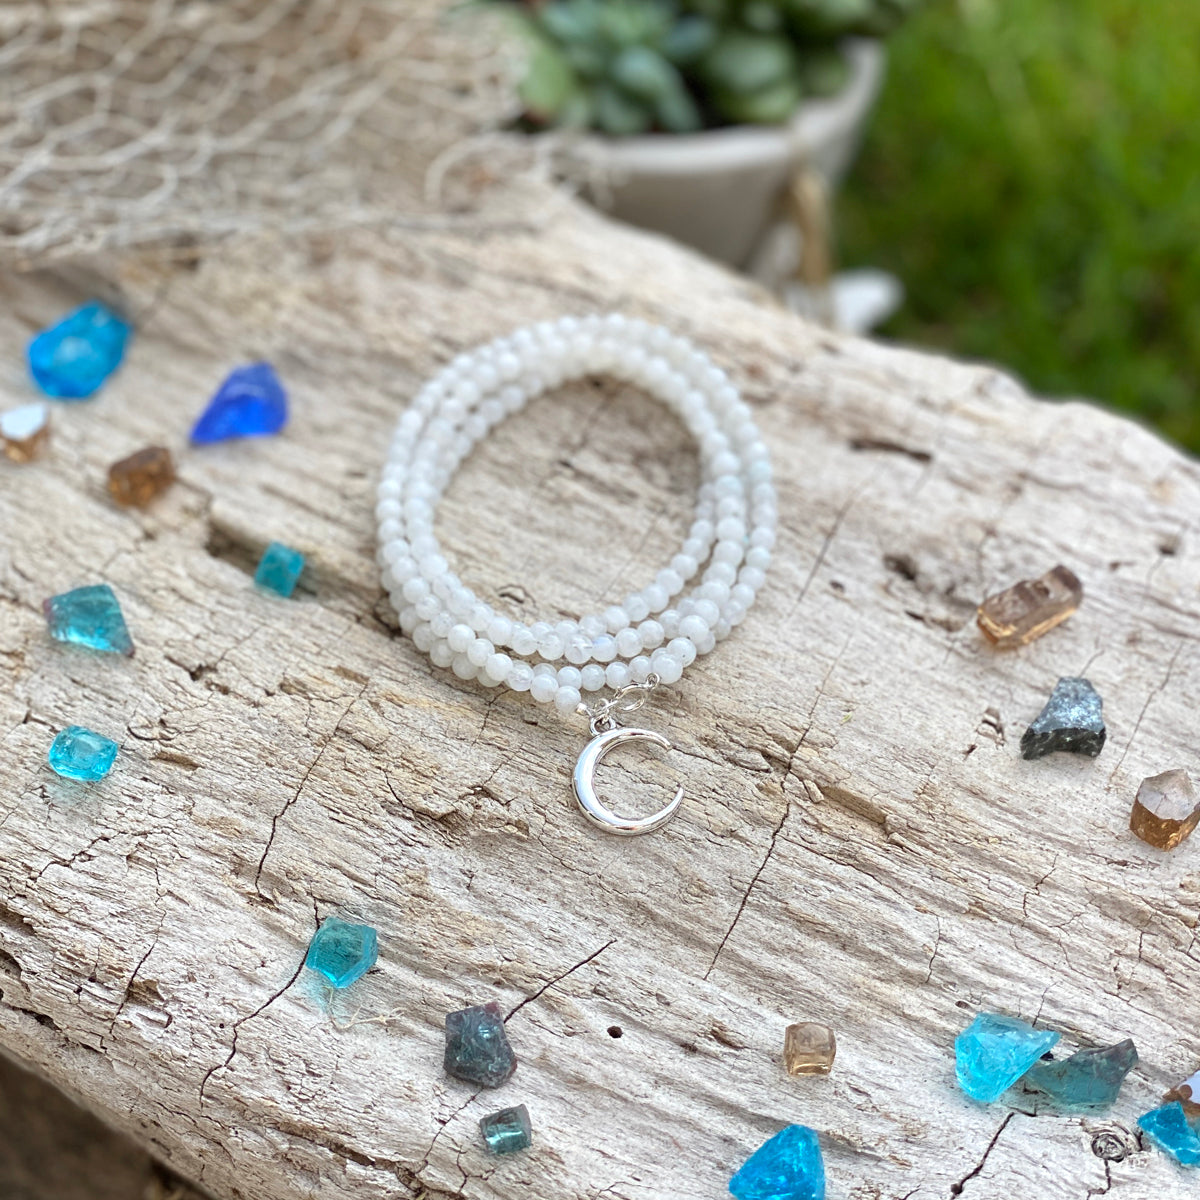 Moonstone Wrap Bracelet with a Crescent Moon Charm to Remind Us of Our Shadow Side